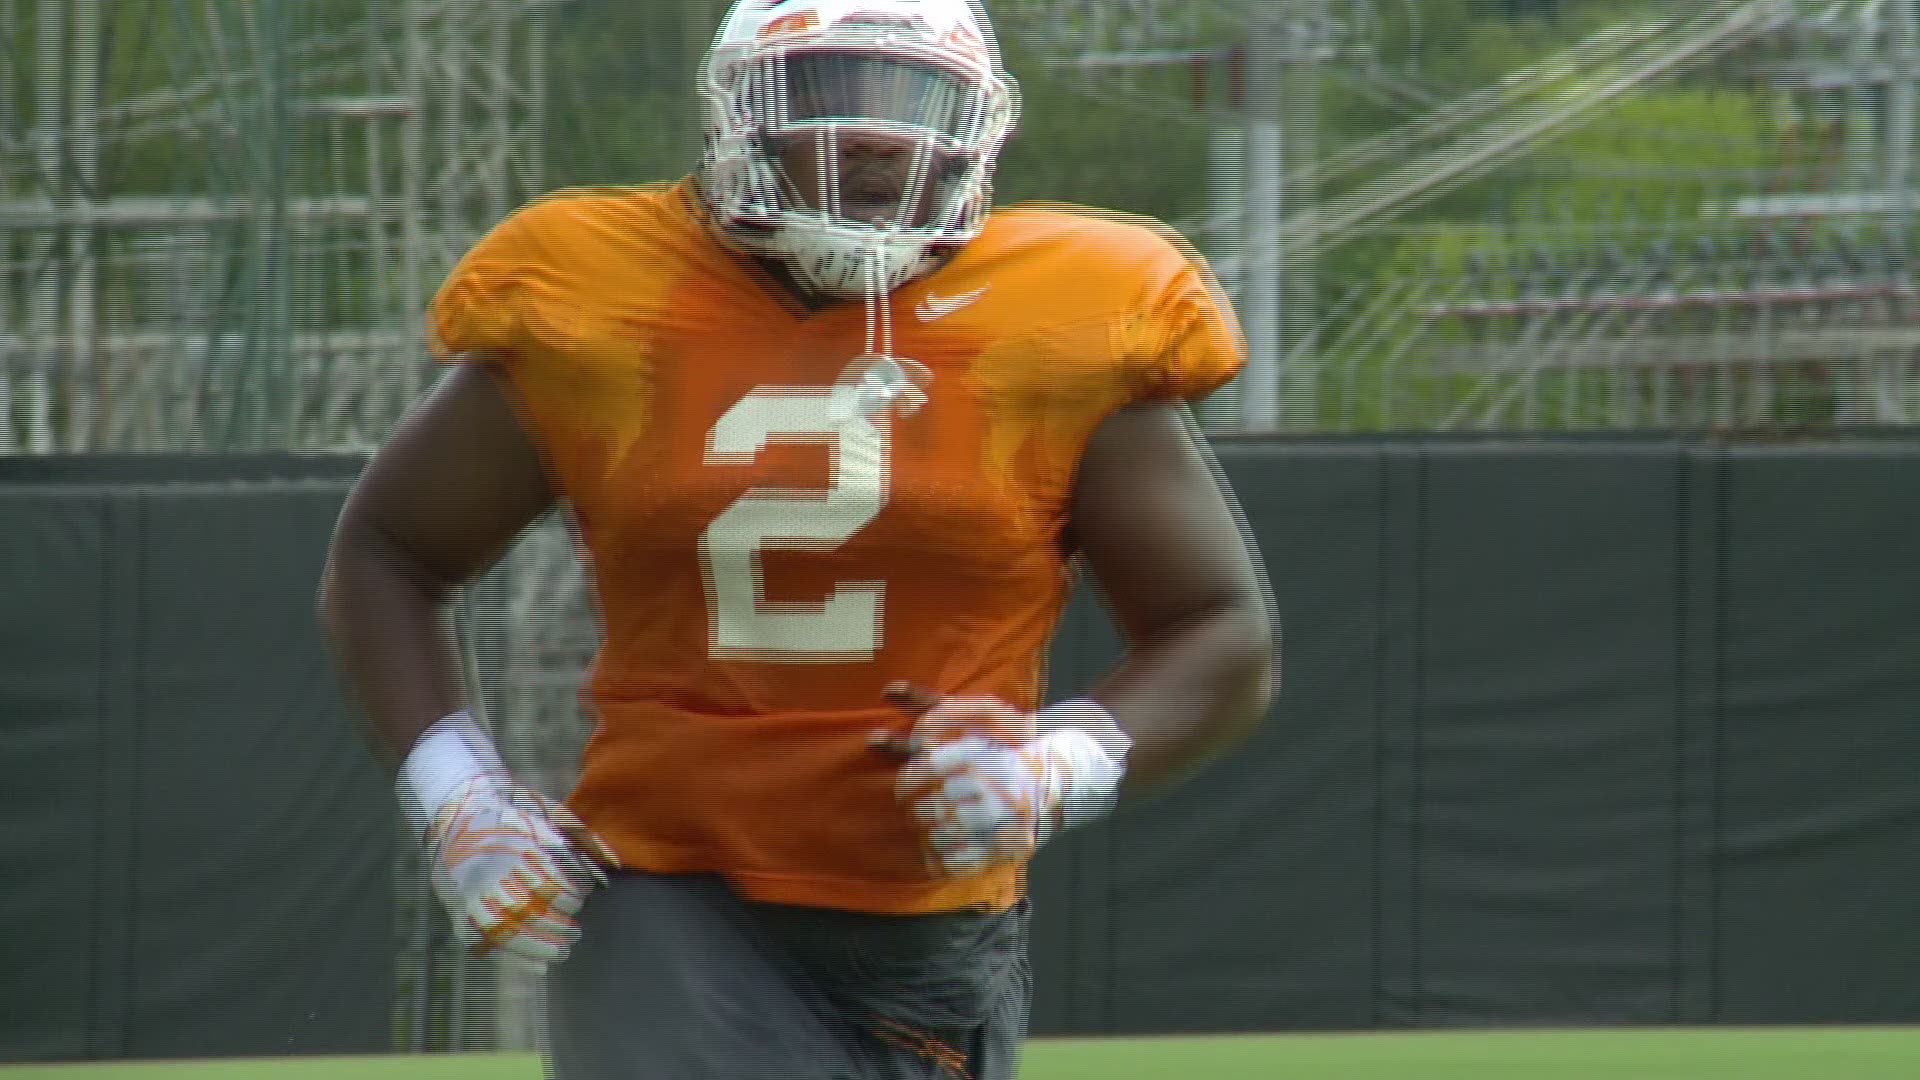 Three weeks until the regular season, here's a look at UT's practice from Saturday.